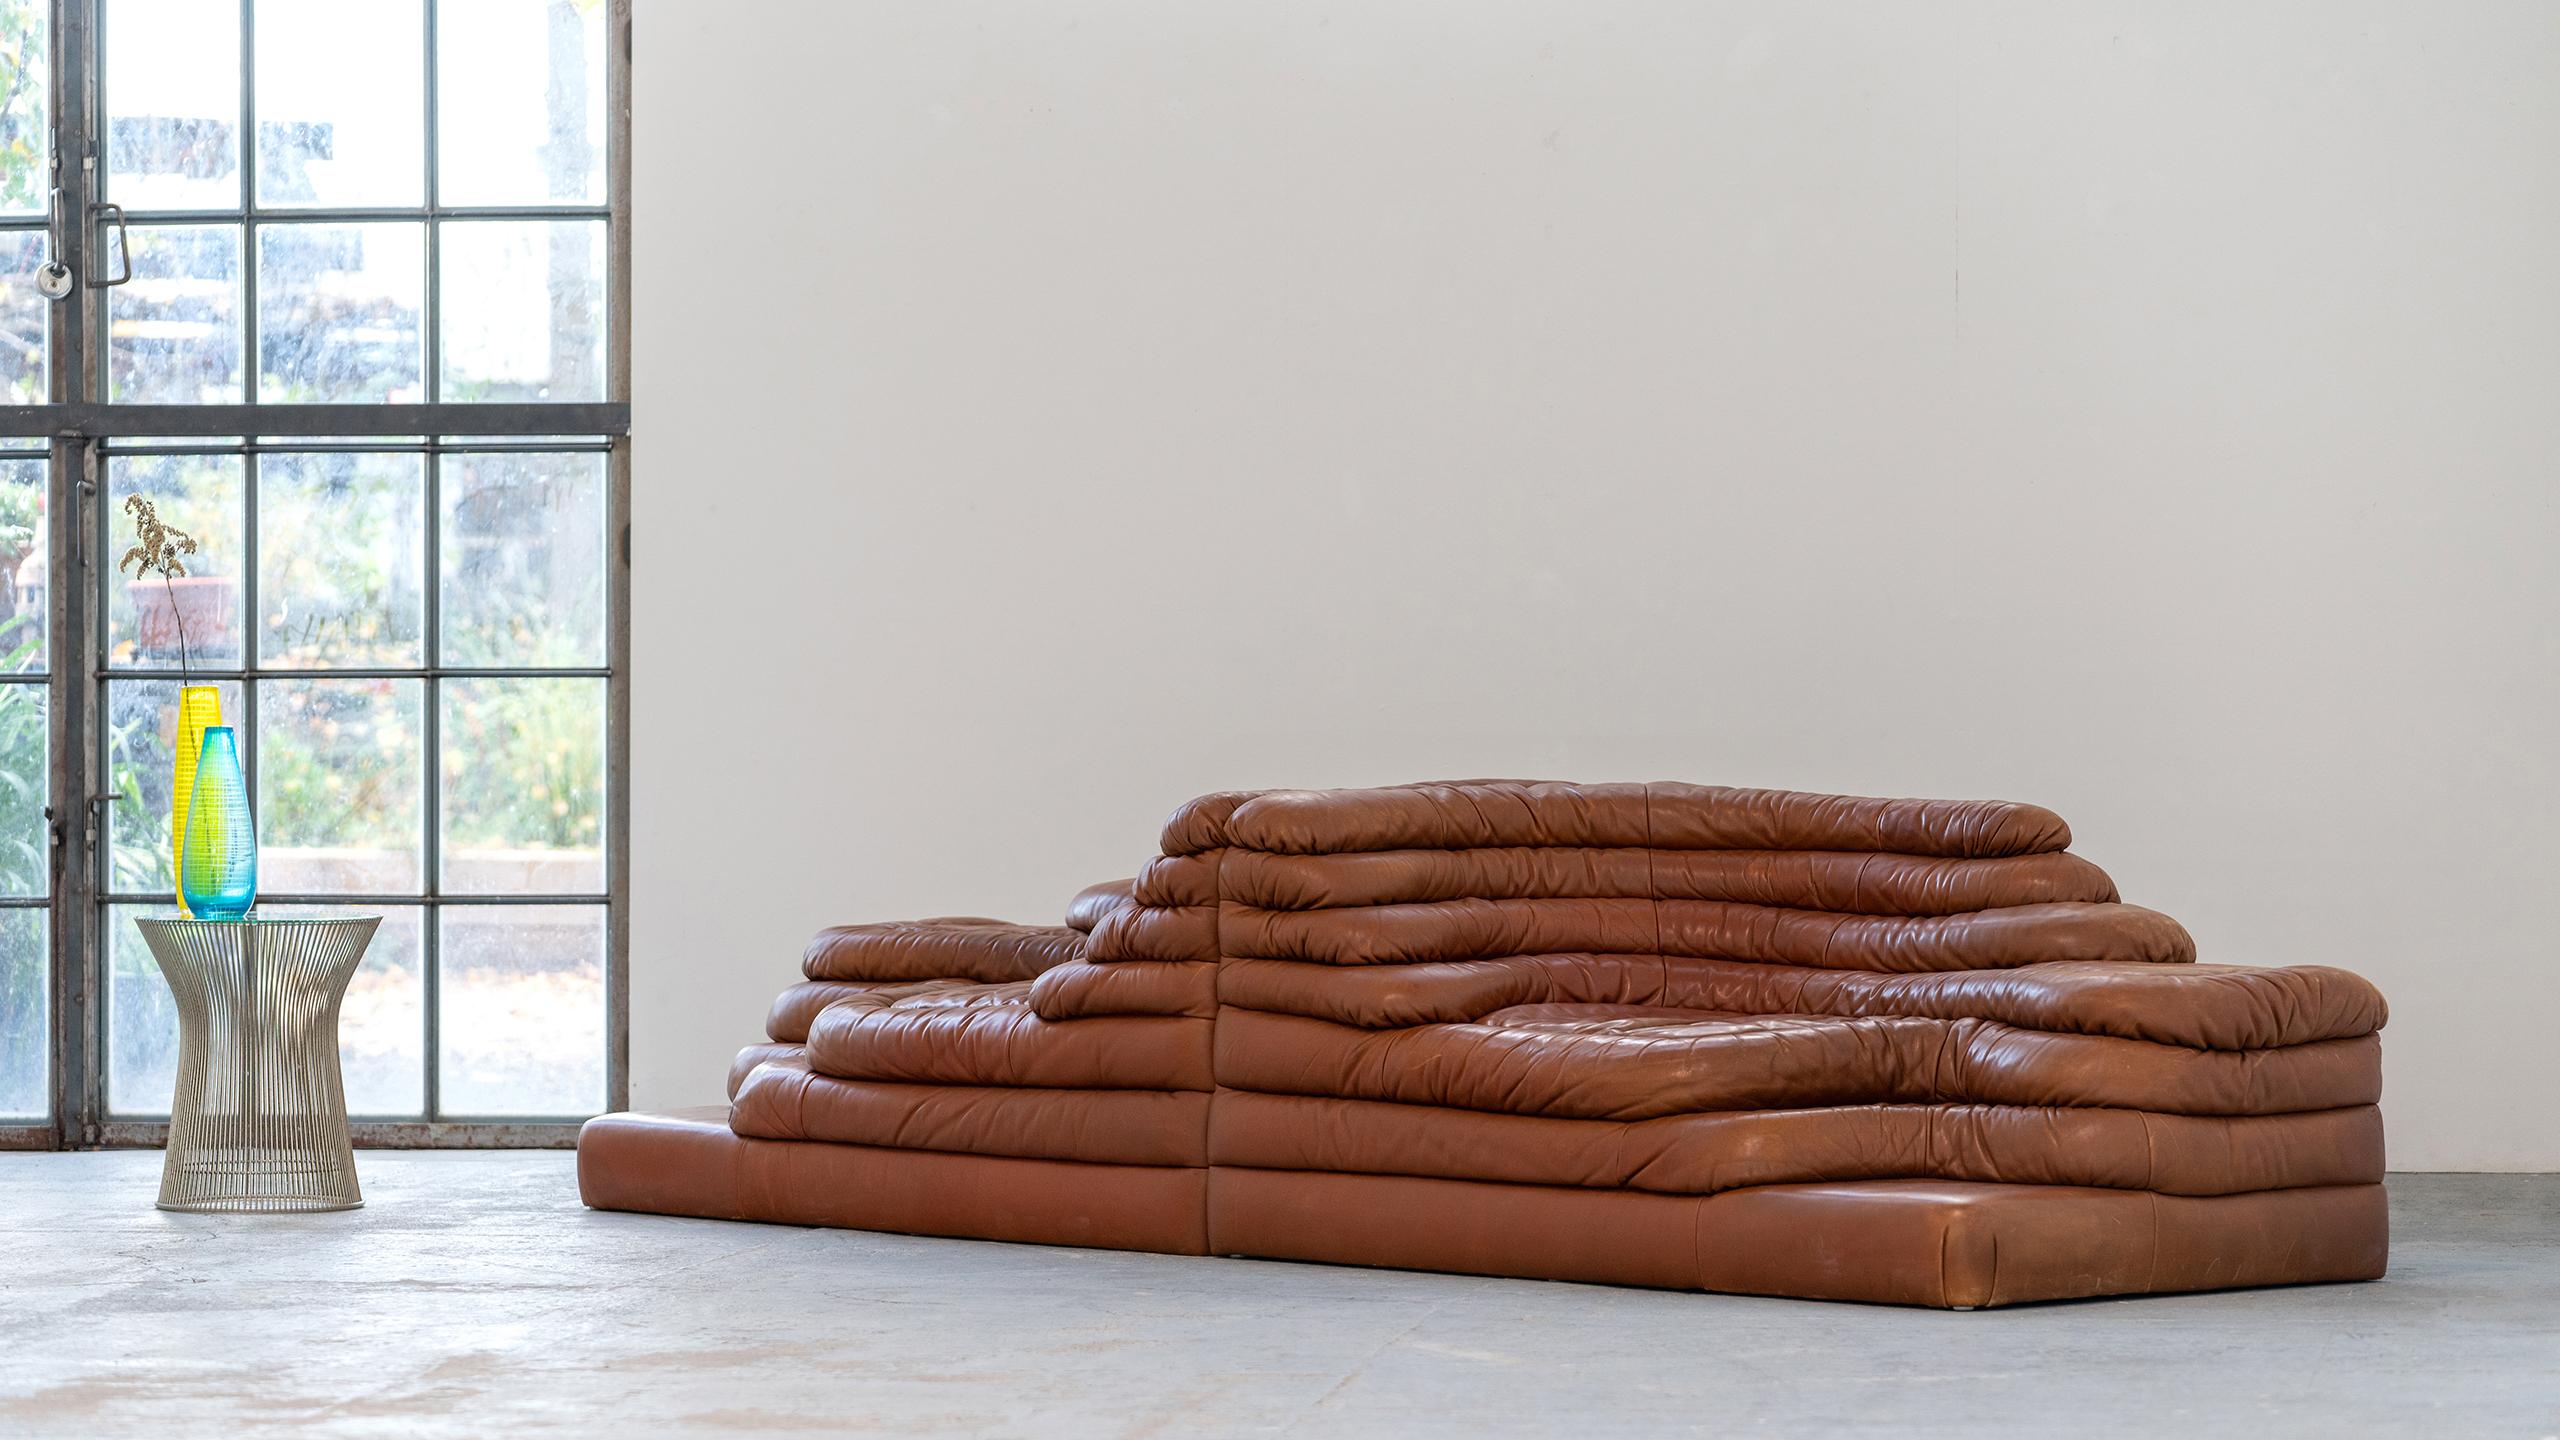 De Sede, 2 Terrazza Sofa DS 1025 in Leather by Ubald Klug & Ueli Berger in 1972 In Good Condition In Munster, NRW